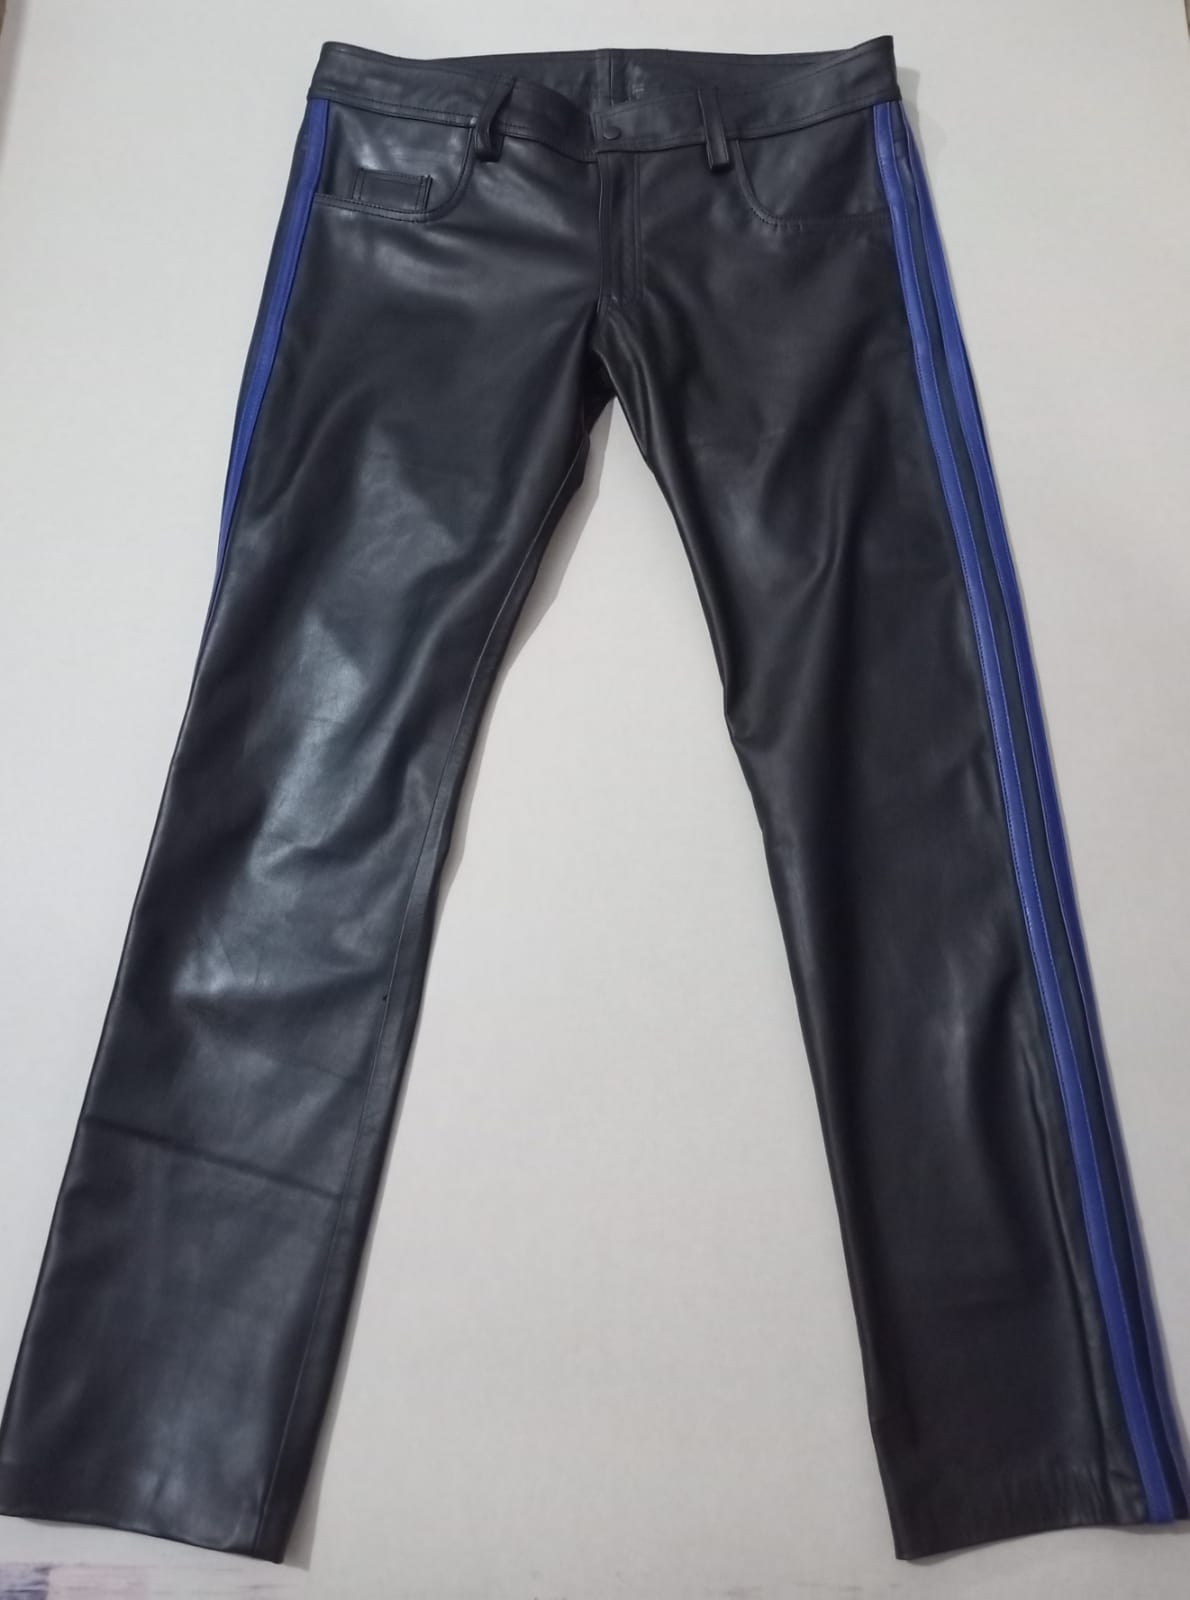 Leather 501 Pant In Jeans Style